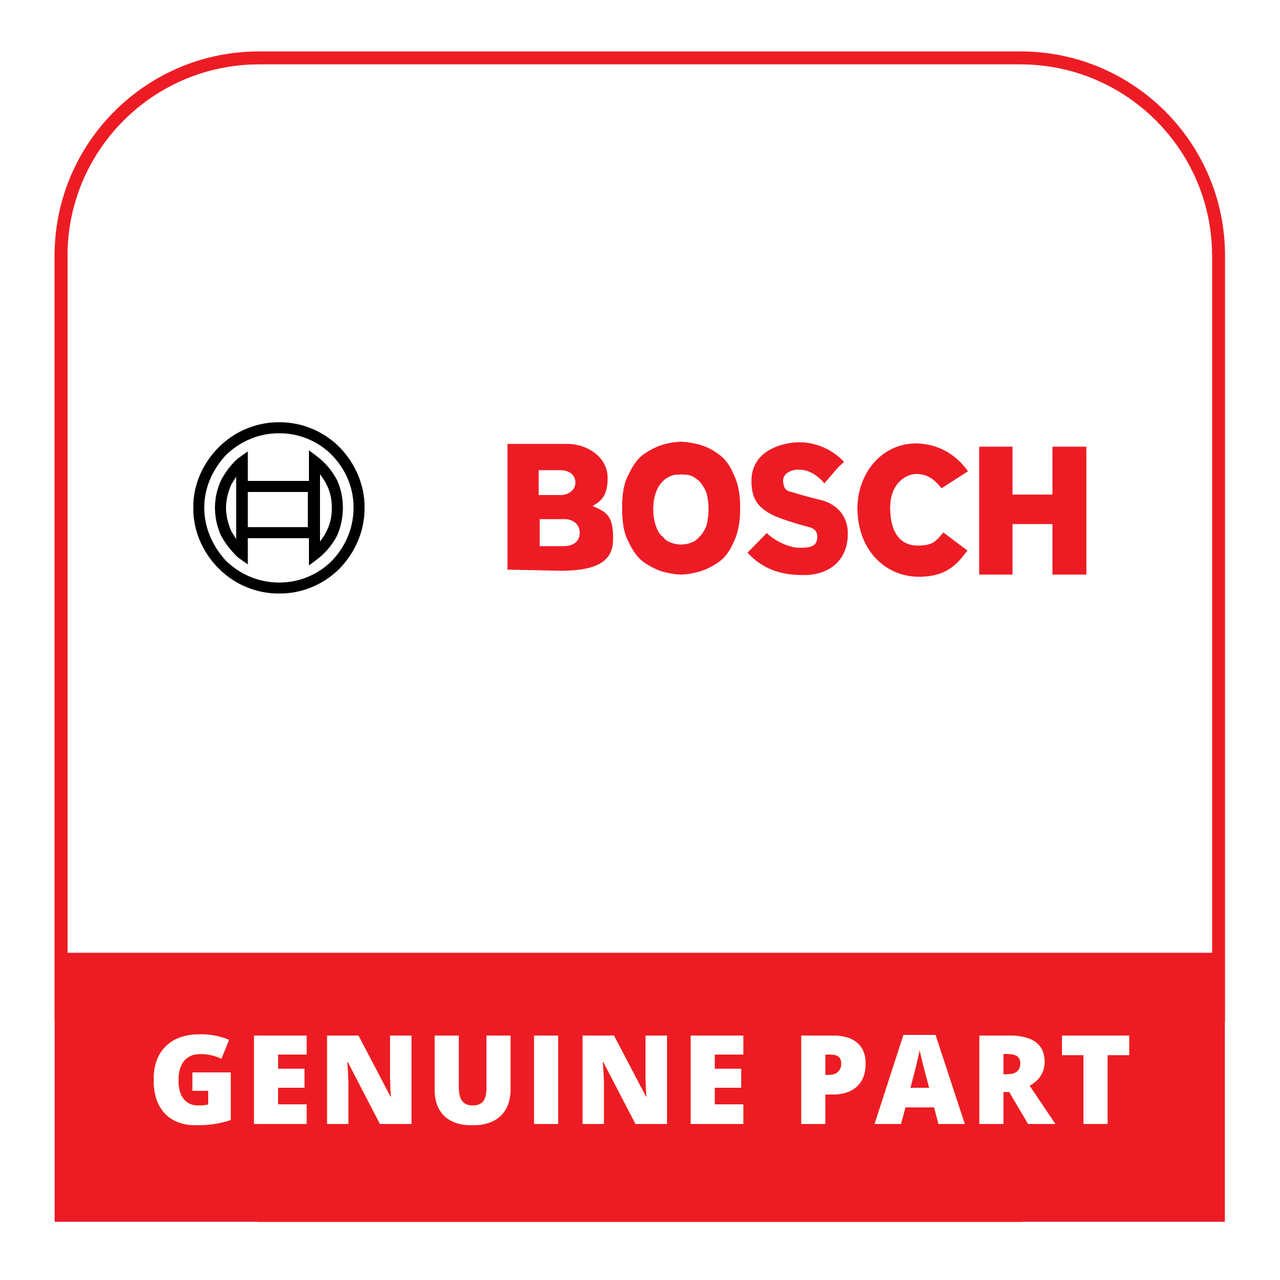 Bosch (Thermador) 11032442 - Tube - Genuine Bosch (Thermador) Part